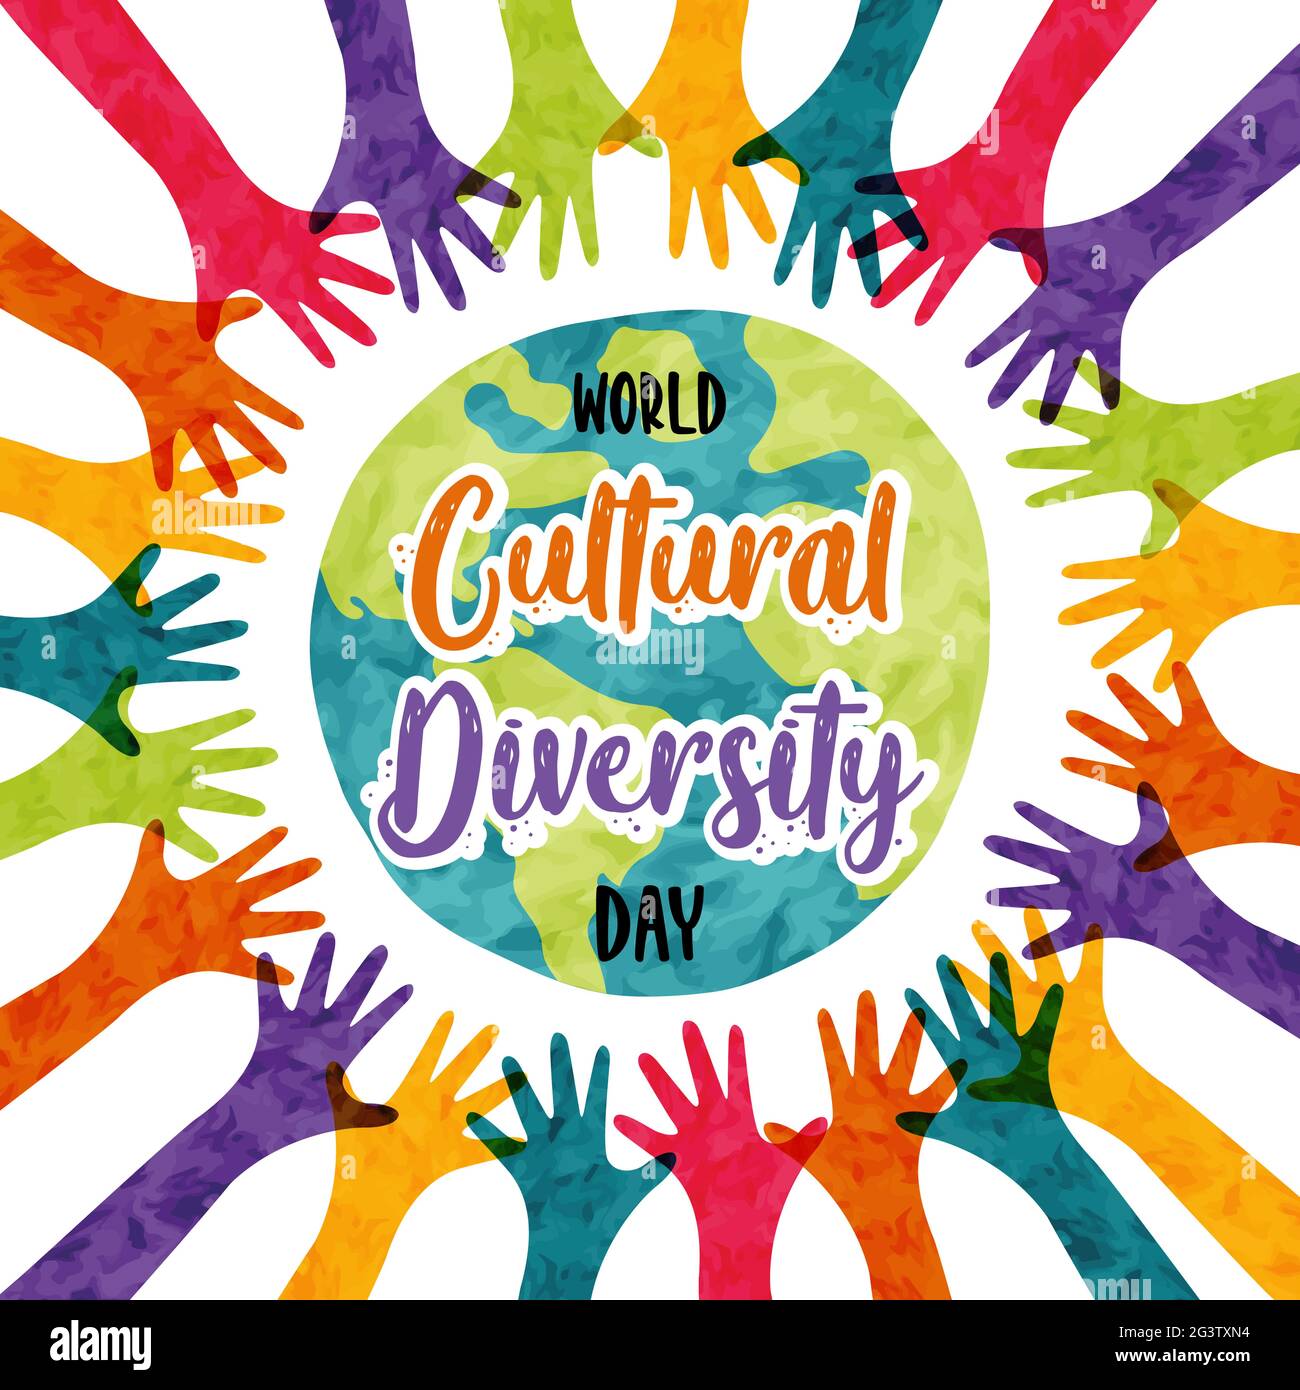 World Cultural Diversity Day greeting card illustration of colorful